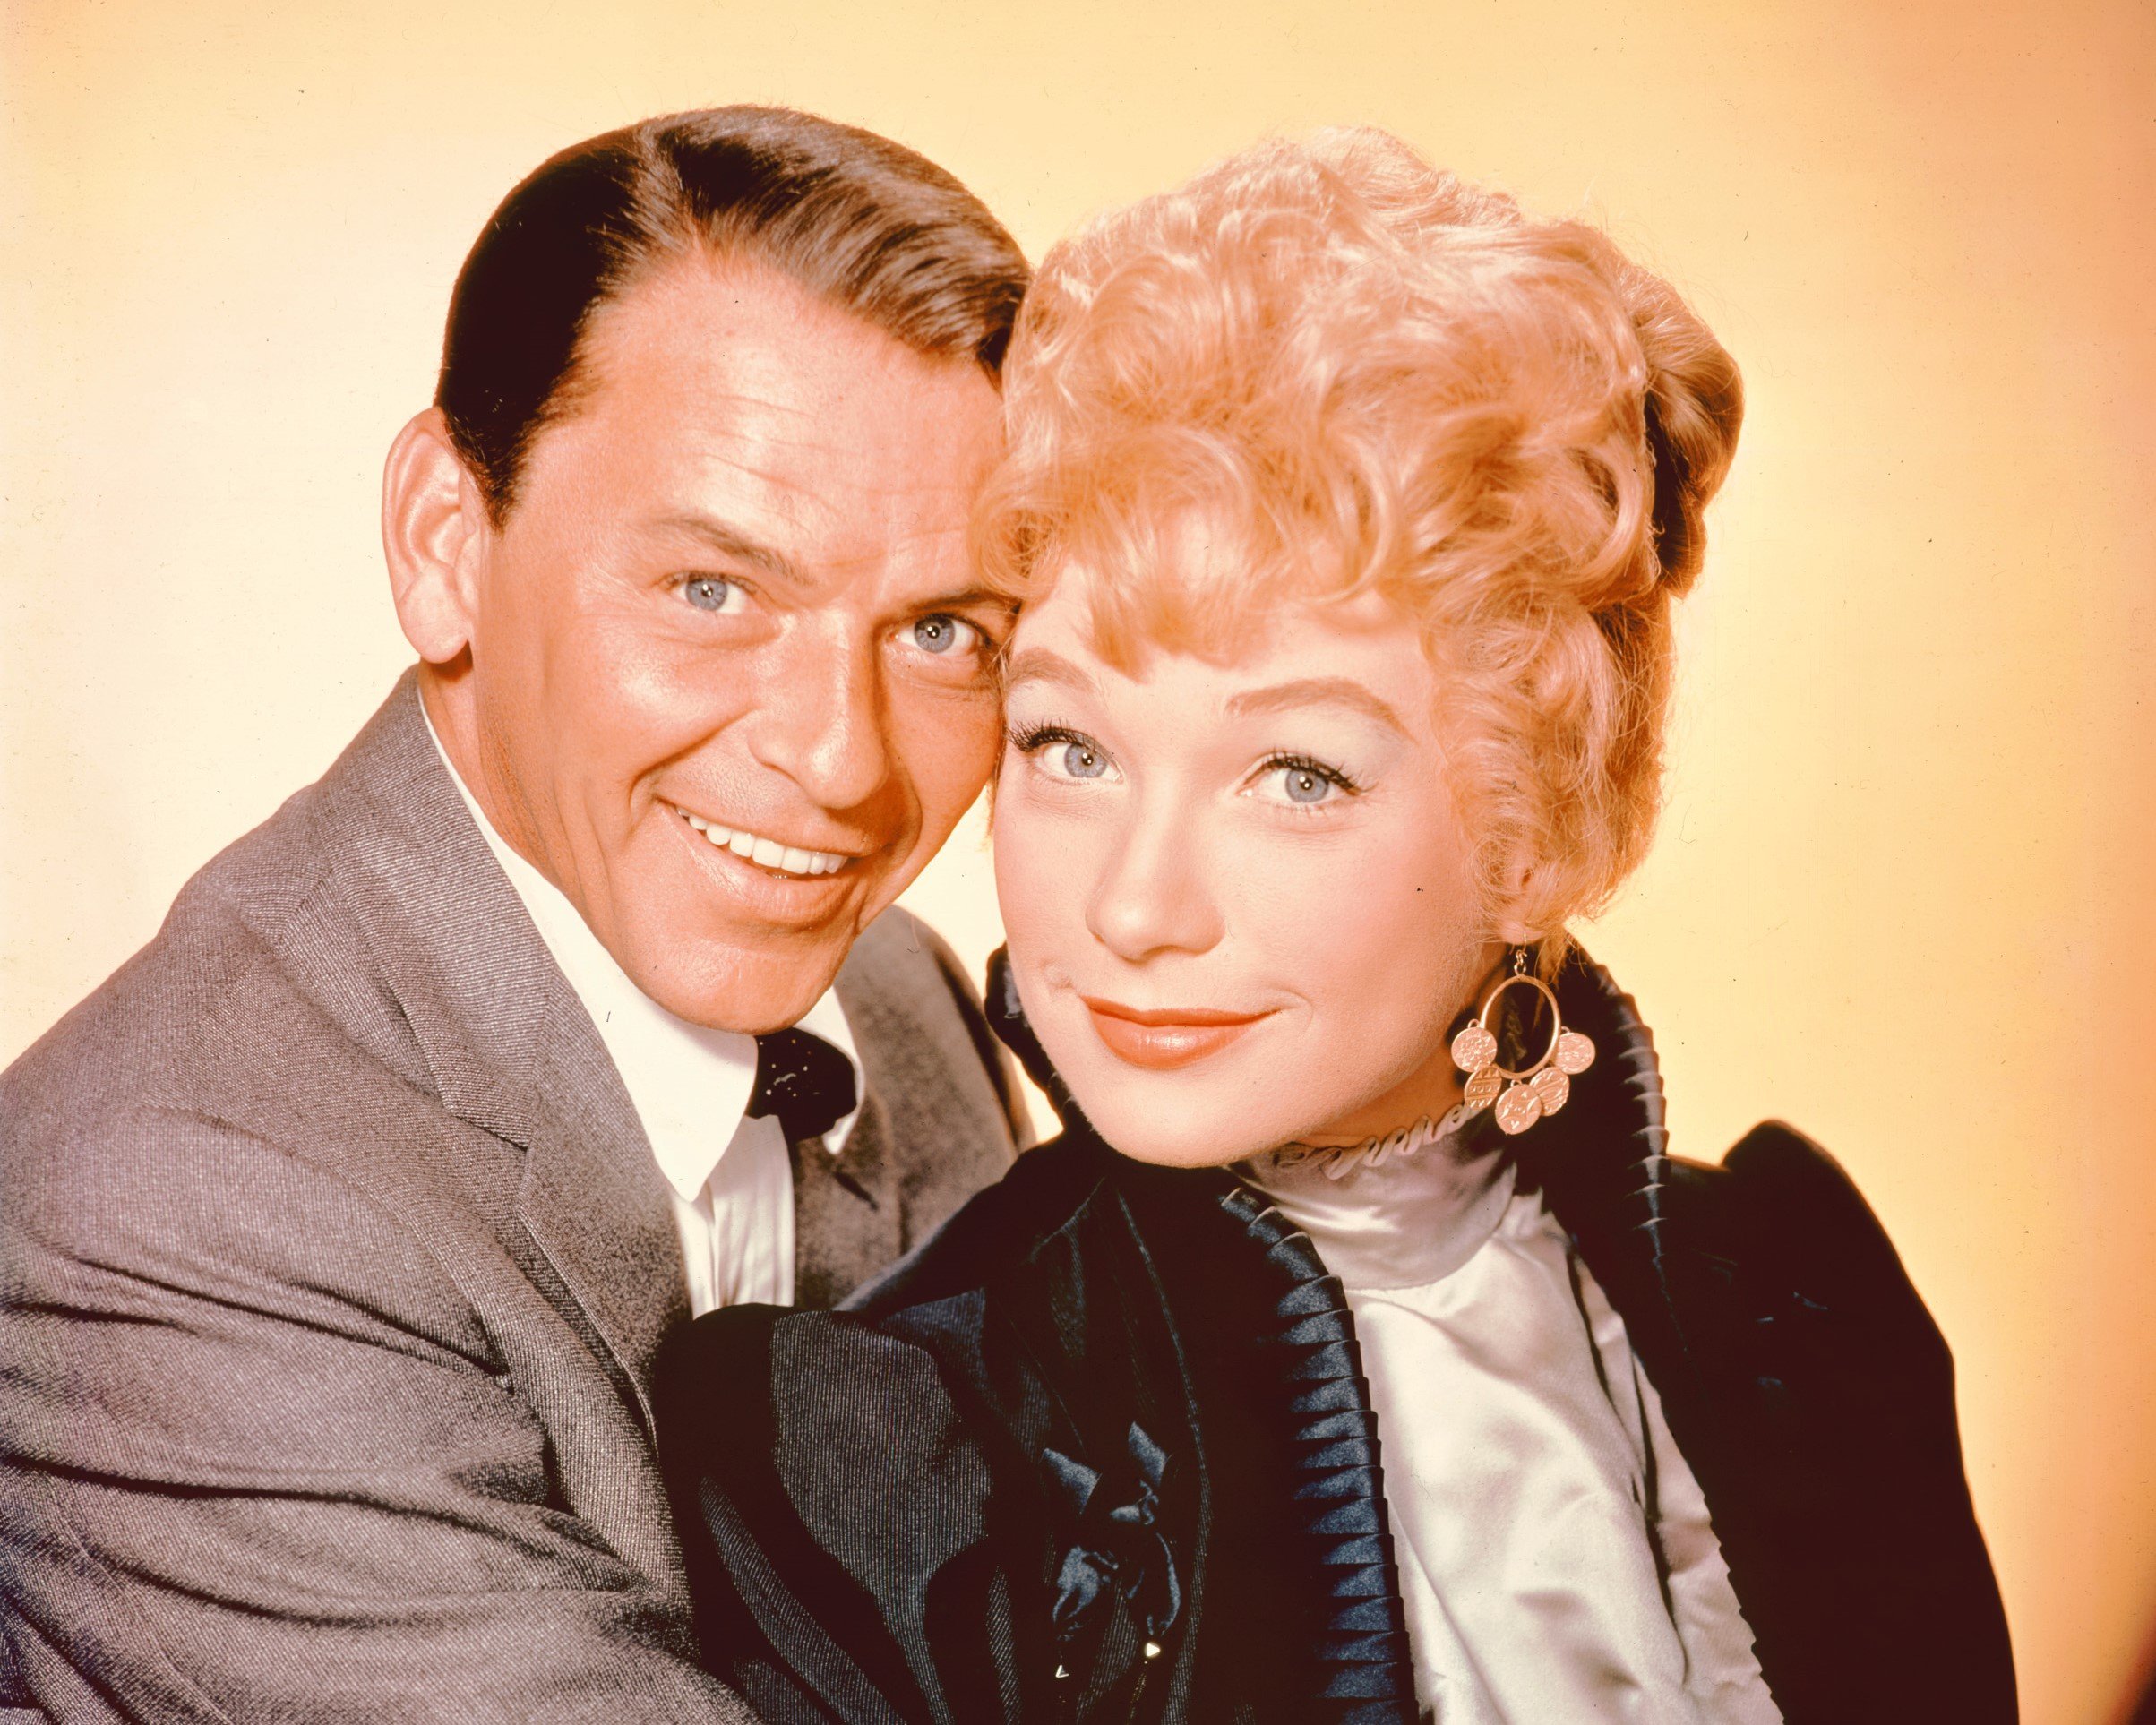 Frank Sinatra and Shirley MacLaine pose together against a yellow background.